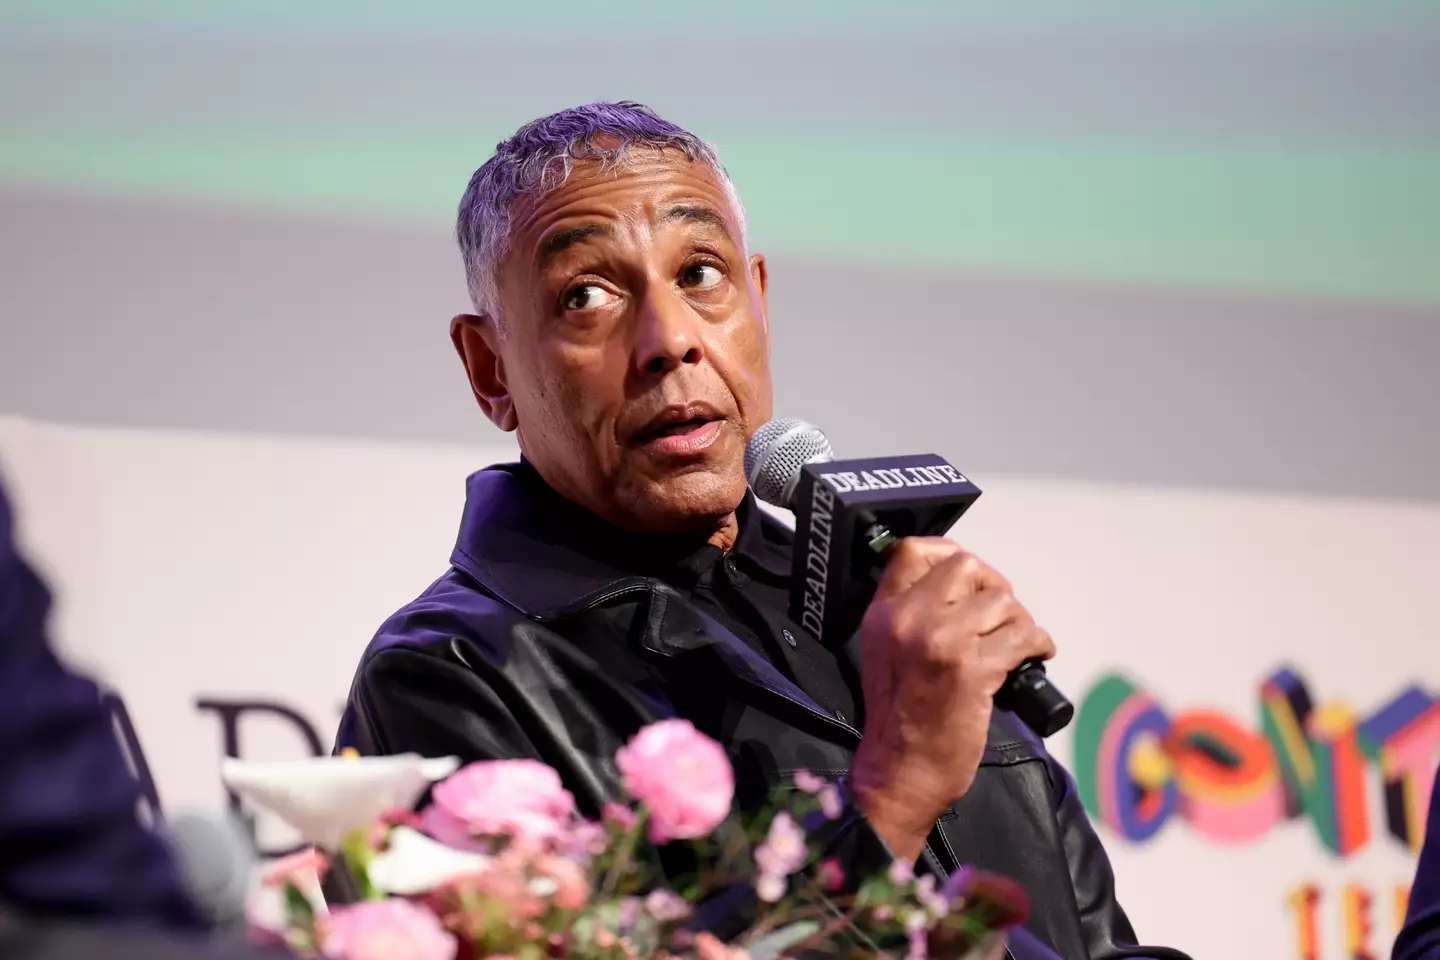 Esposito played Gus Fring in Breaking Bad and Better Call Saul (Rich Polk/Deadline via Getty Images)